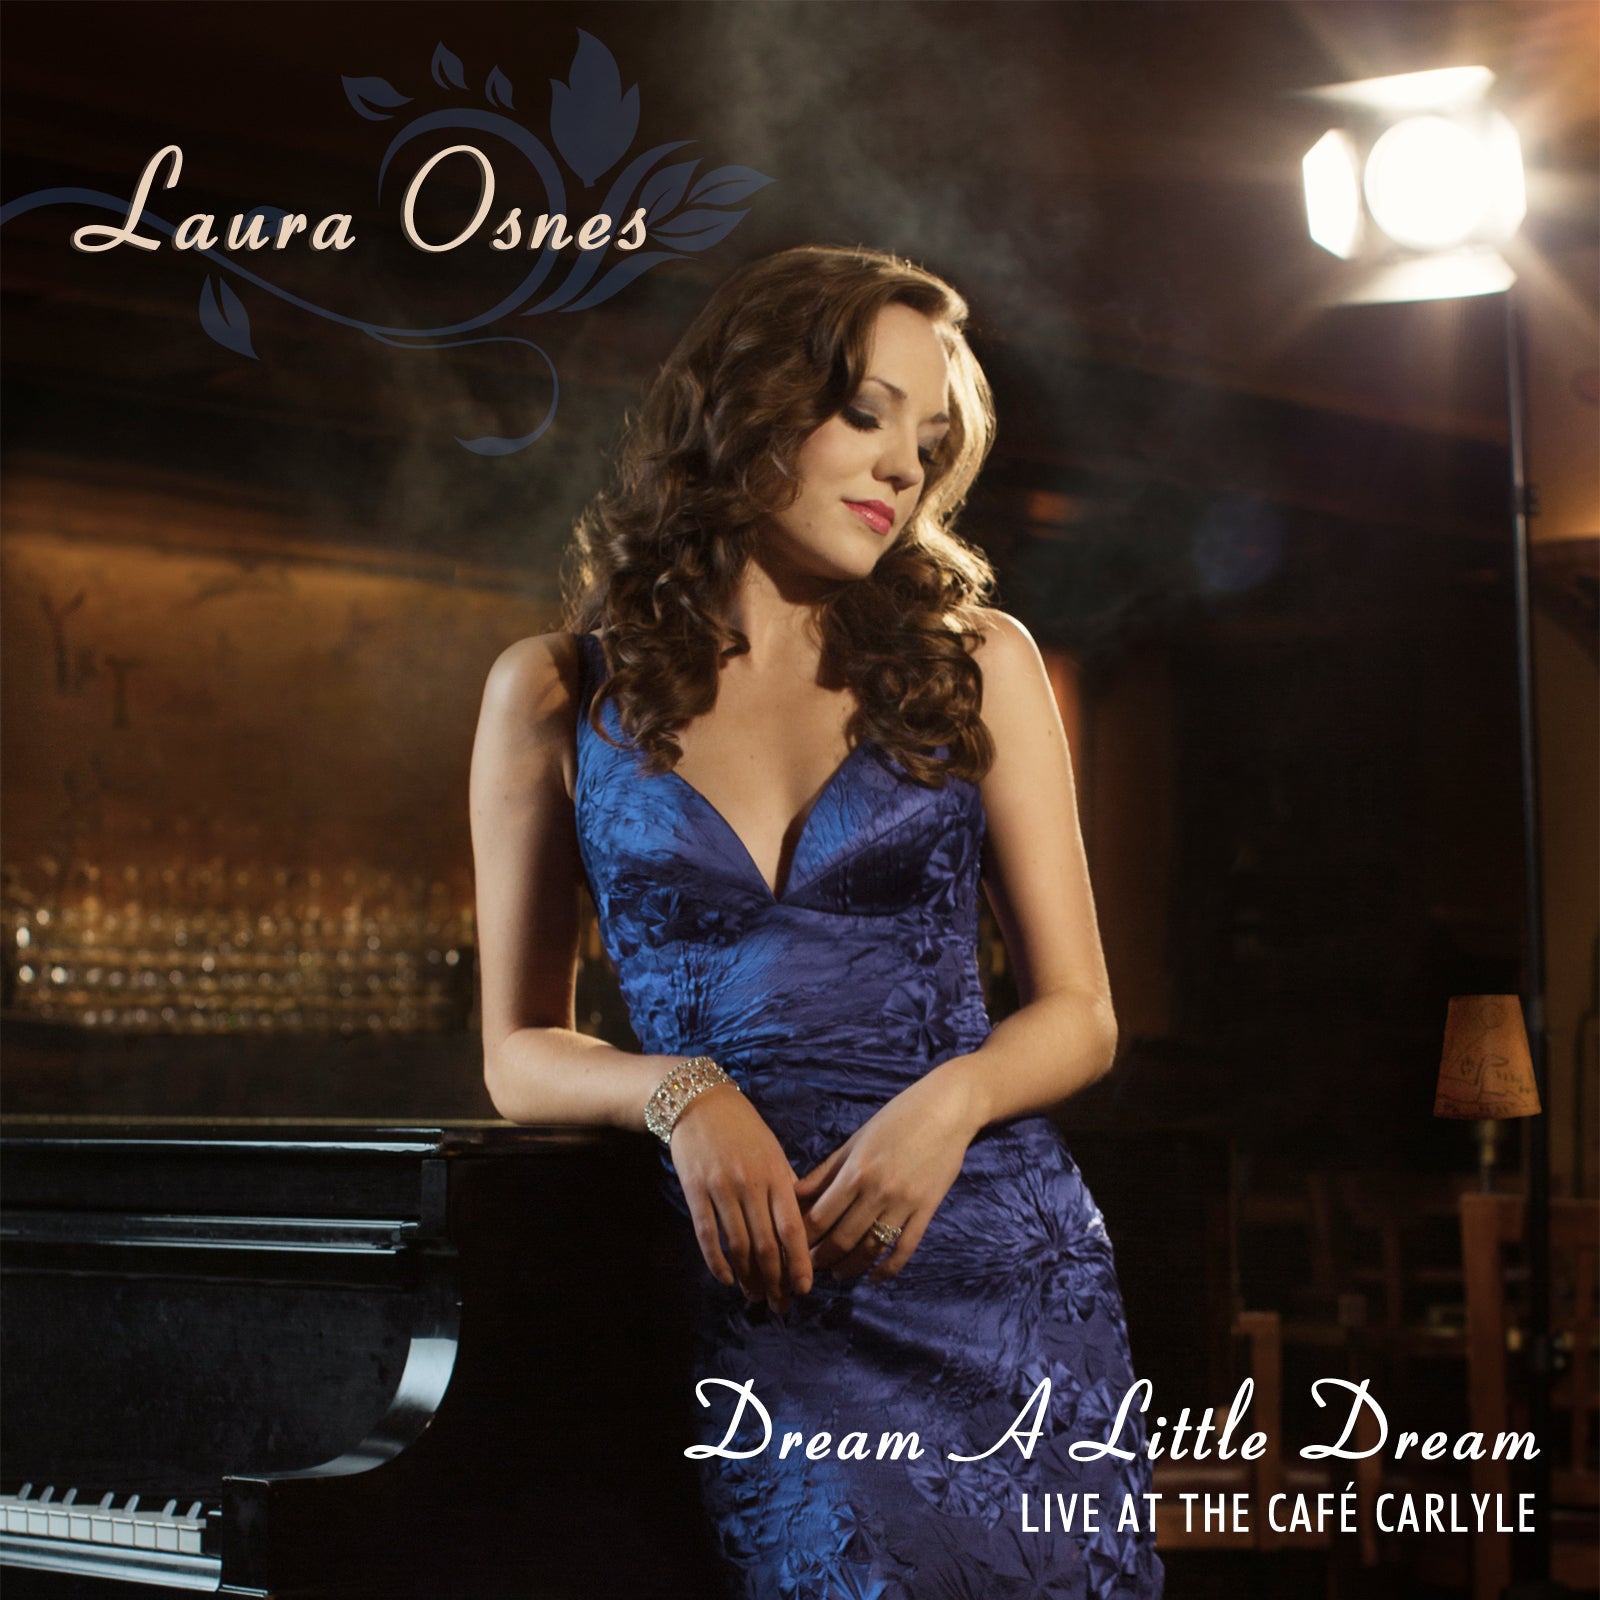 Laura Osnes: Dream A Little Dream - Live at the Cafe Carlyle [CD]